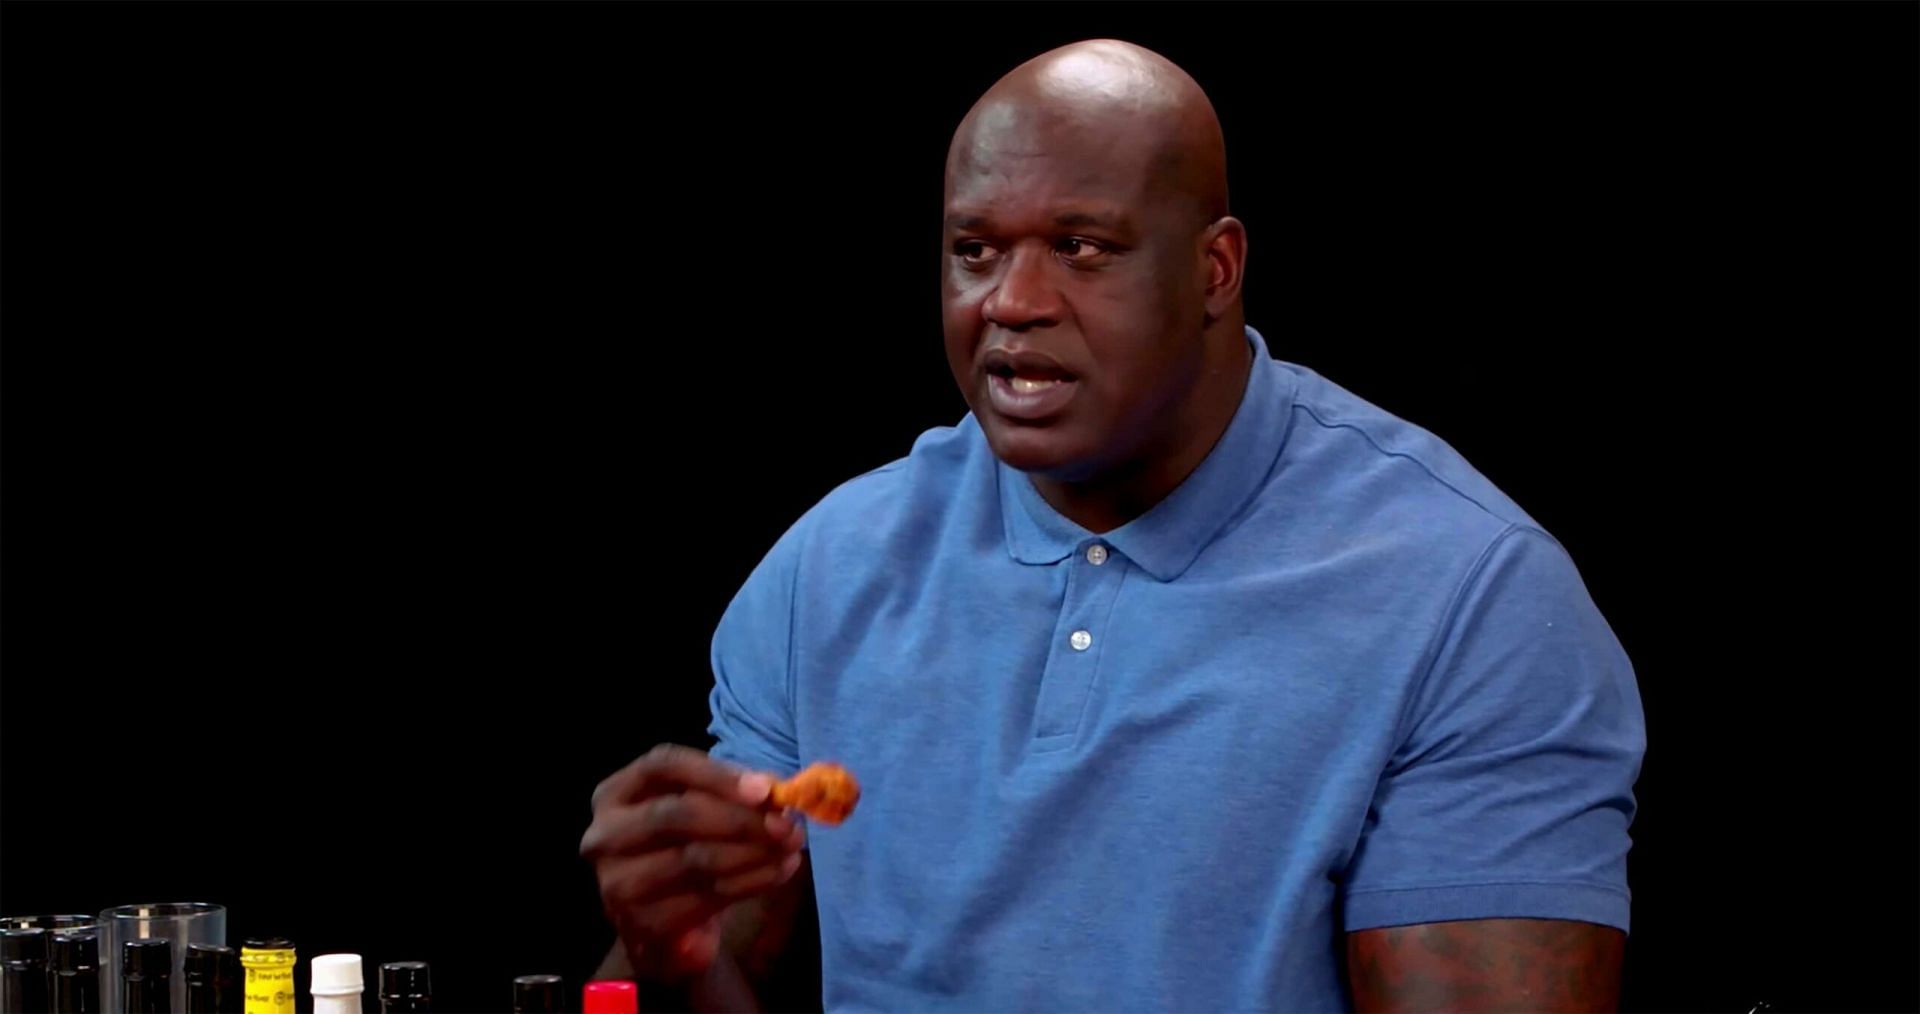 O'Neal holds up a chicken wing [Source: MobileSyrup]